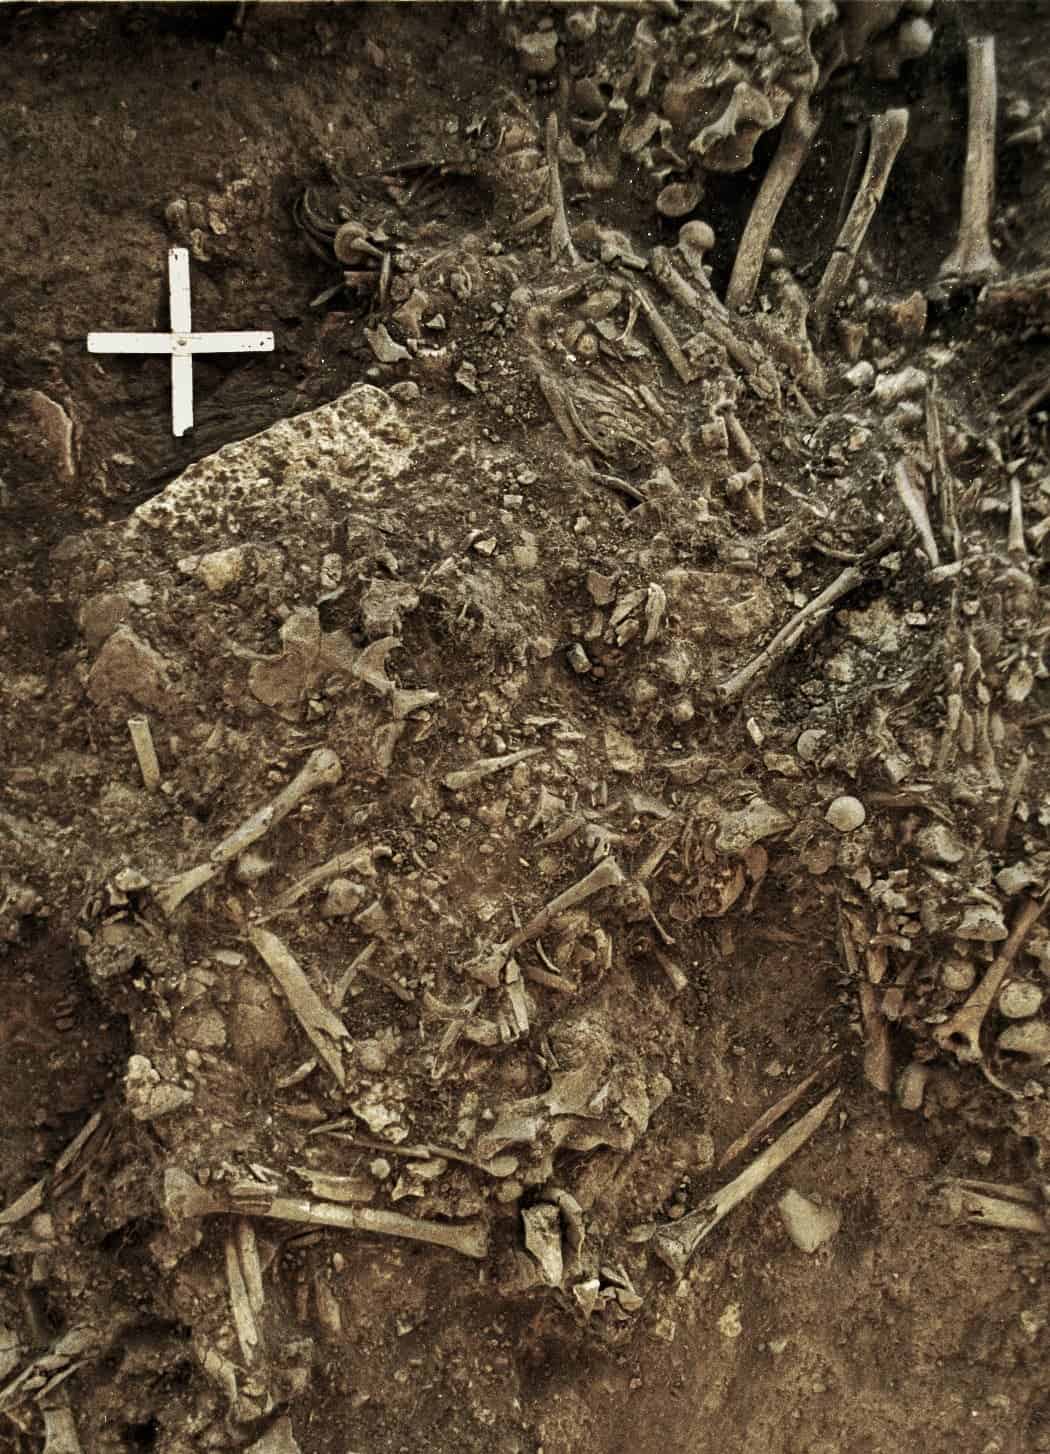 Photo showing the remains of a 20-year old woman from around 4,900 years ago, who was killed by the first plague pandemic. Credit: Karl-Göran Sjögren.